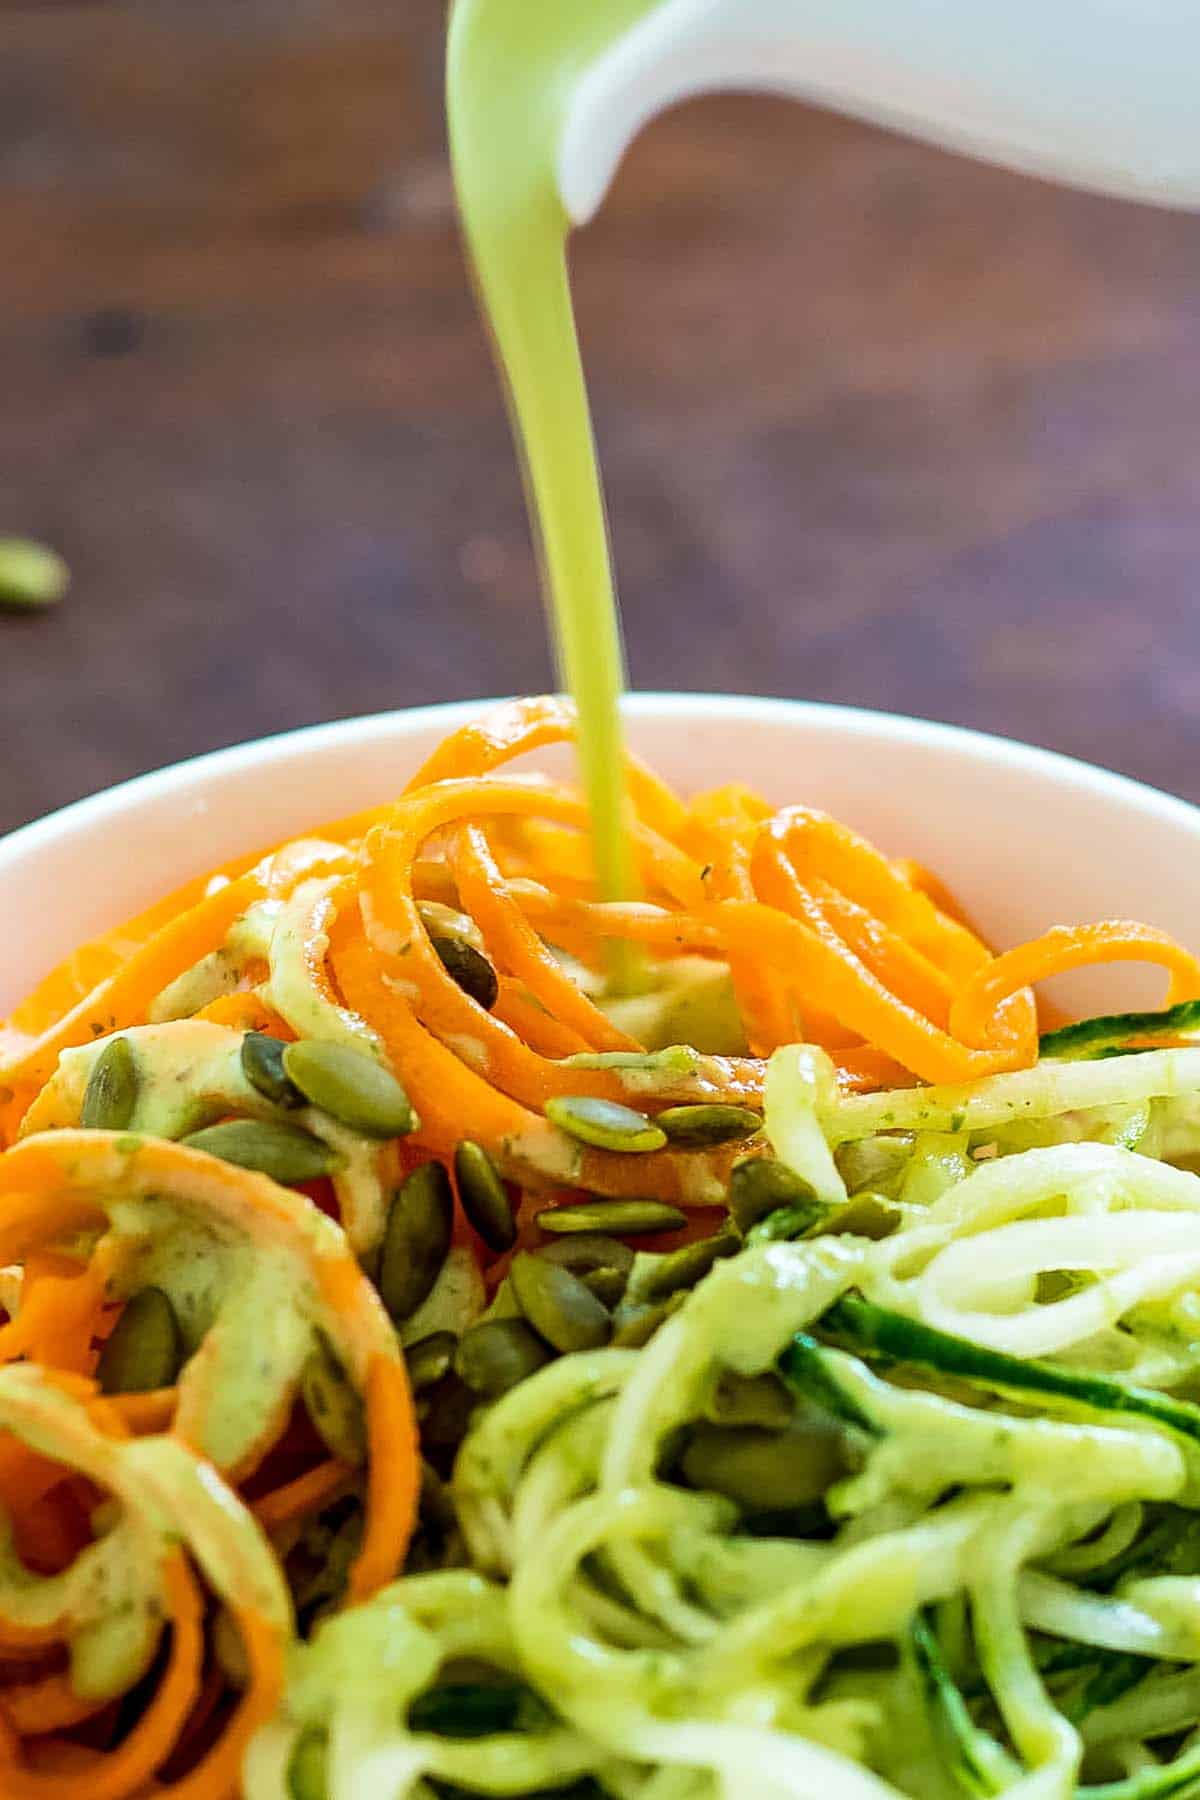 Carrot and cucumber salad with avocado dressing and pumpkin seed topping